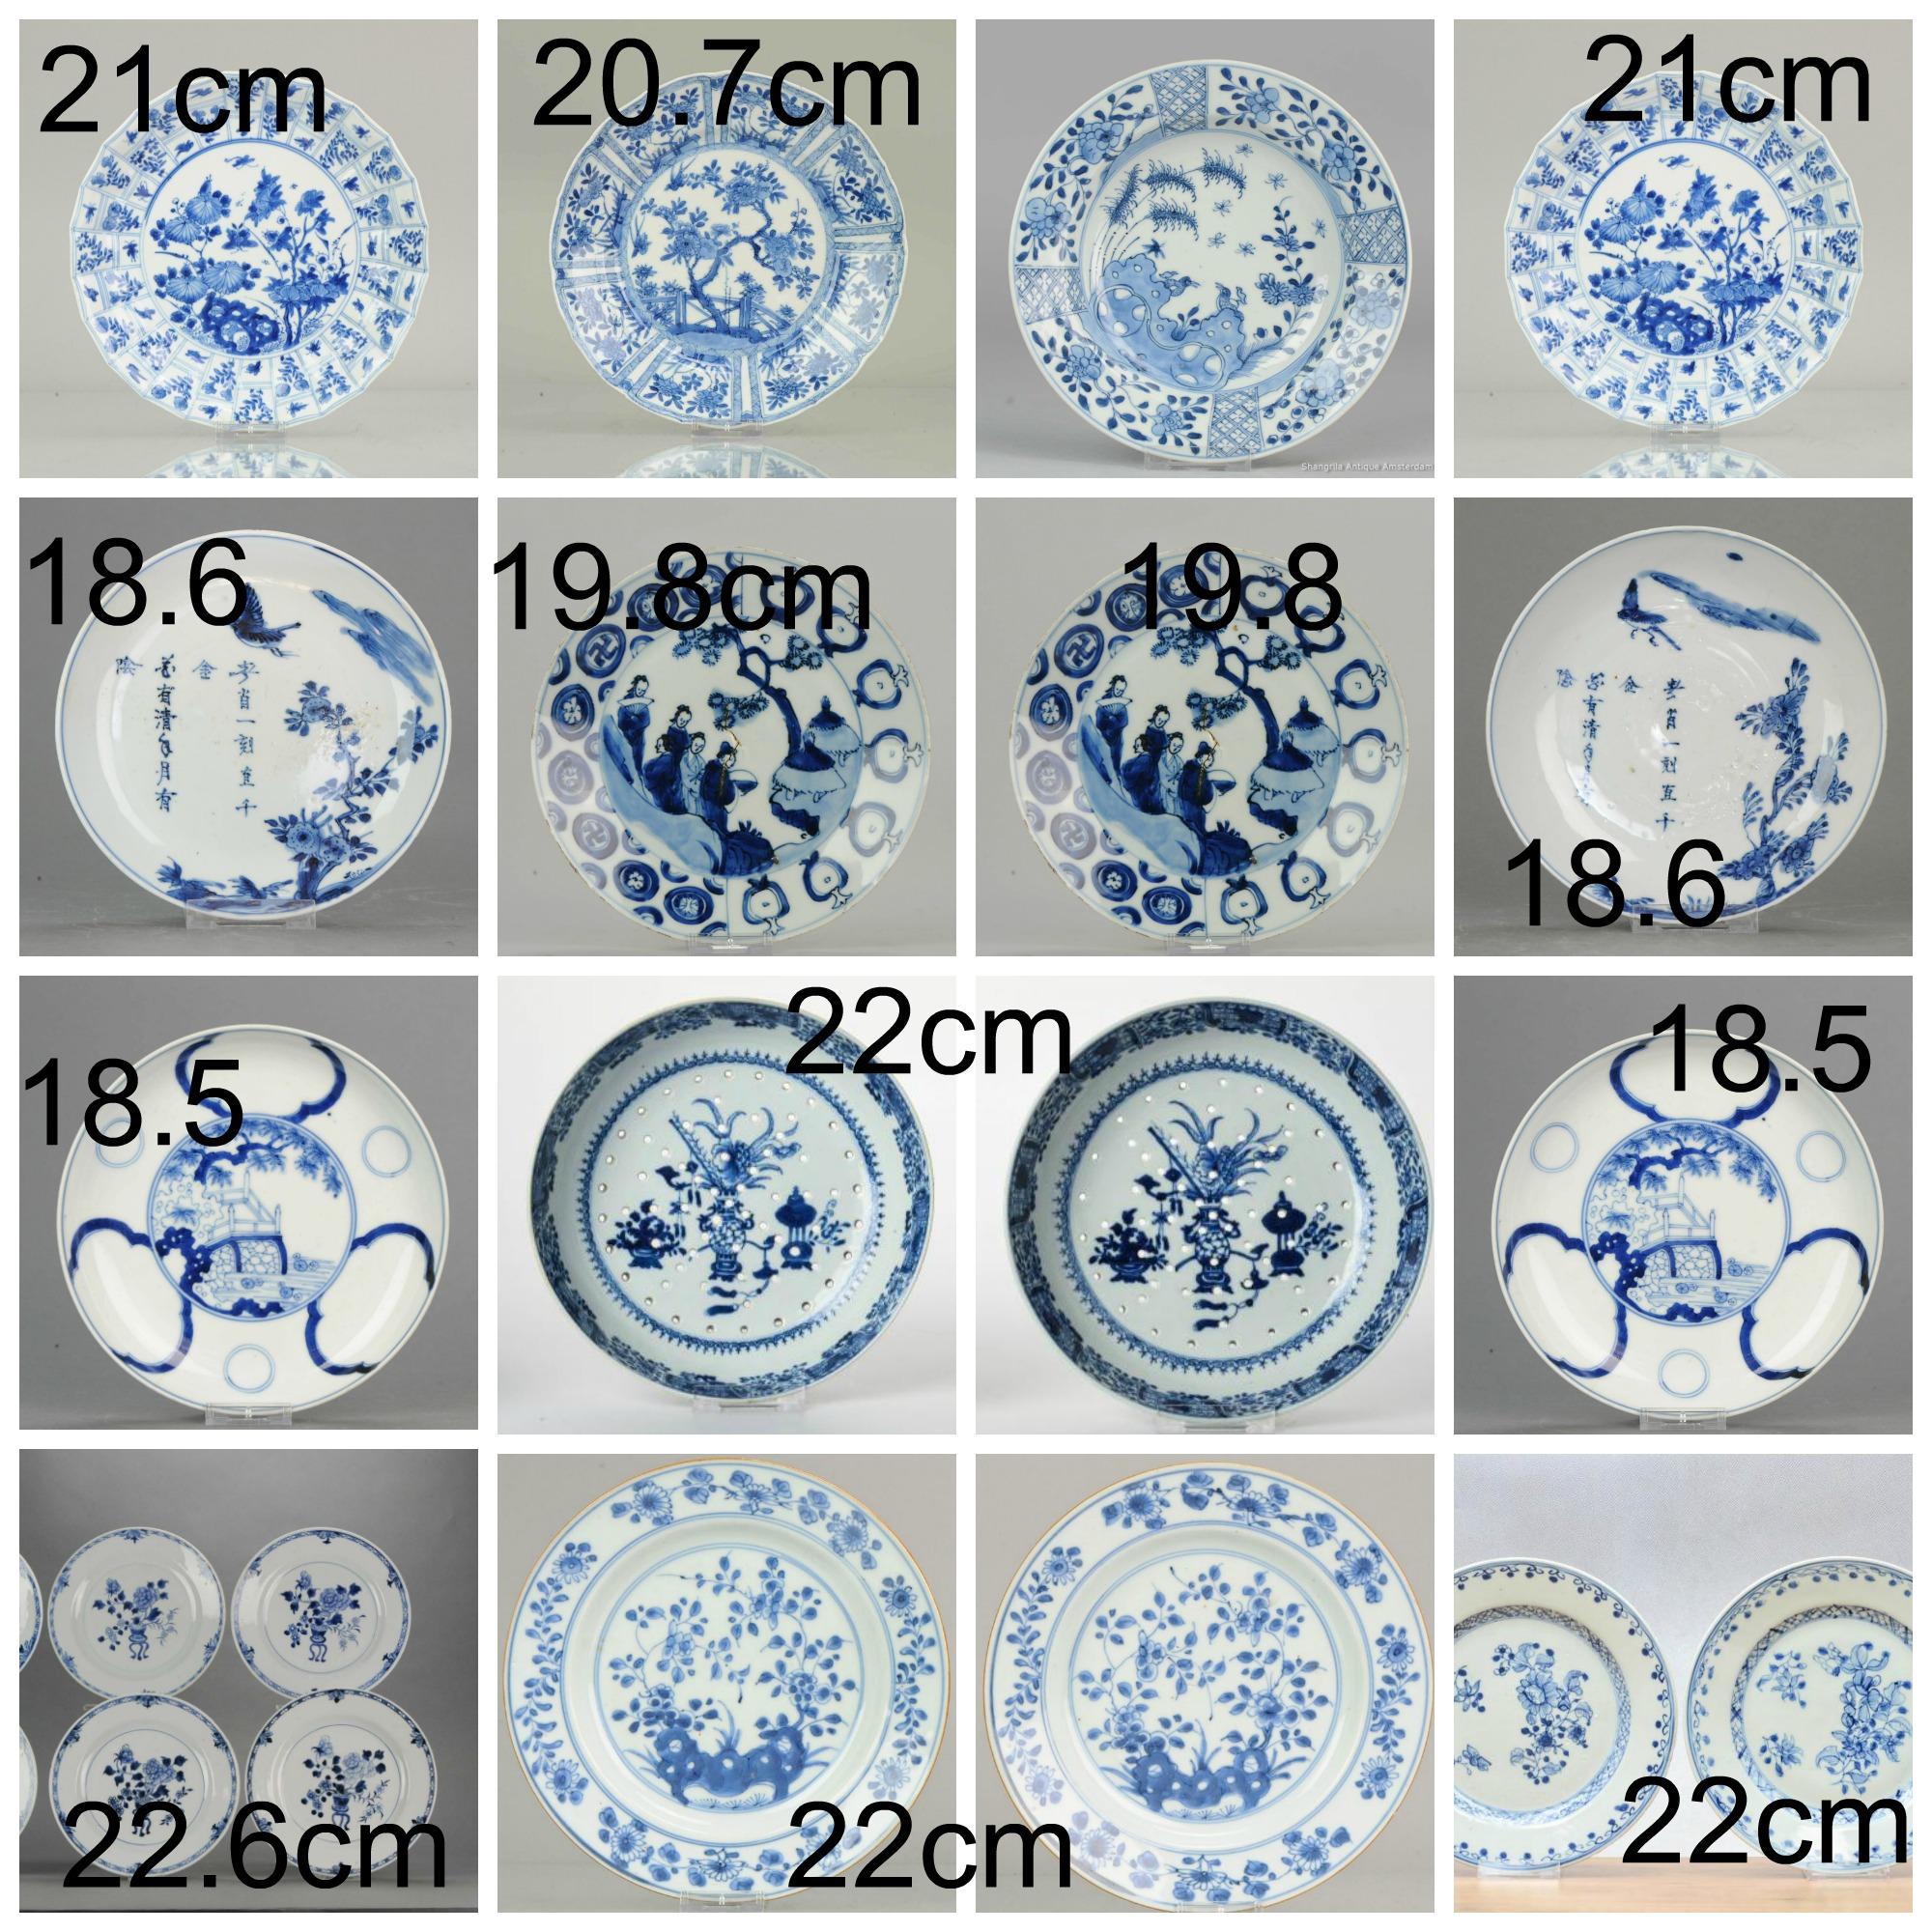 This is an impression!

Perfect for interior wall decoration. We offer sets of 18th-19th century Chinese & Japanese & Delft blue and white plates. Available in every quantity needed. The selection in the pictures might not be available due to